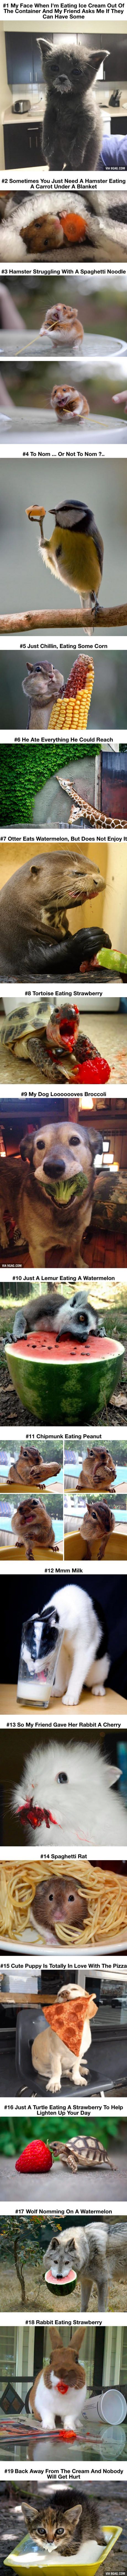 Animals who look adorable and funny when they are eating…. with a mouthful: